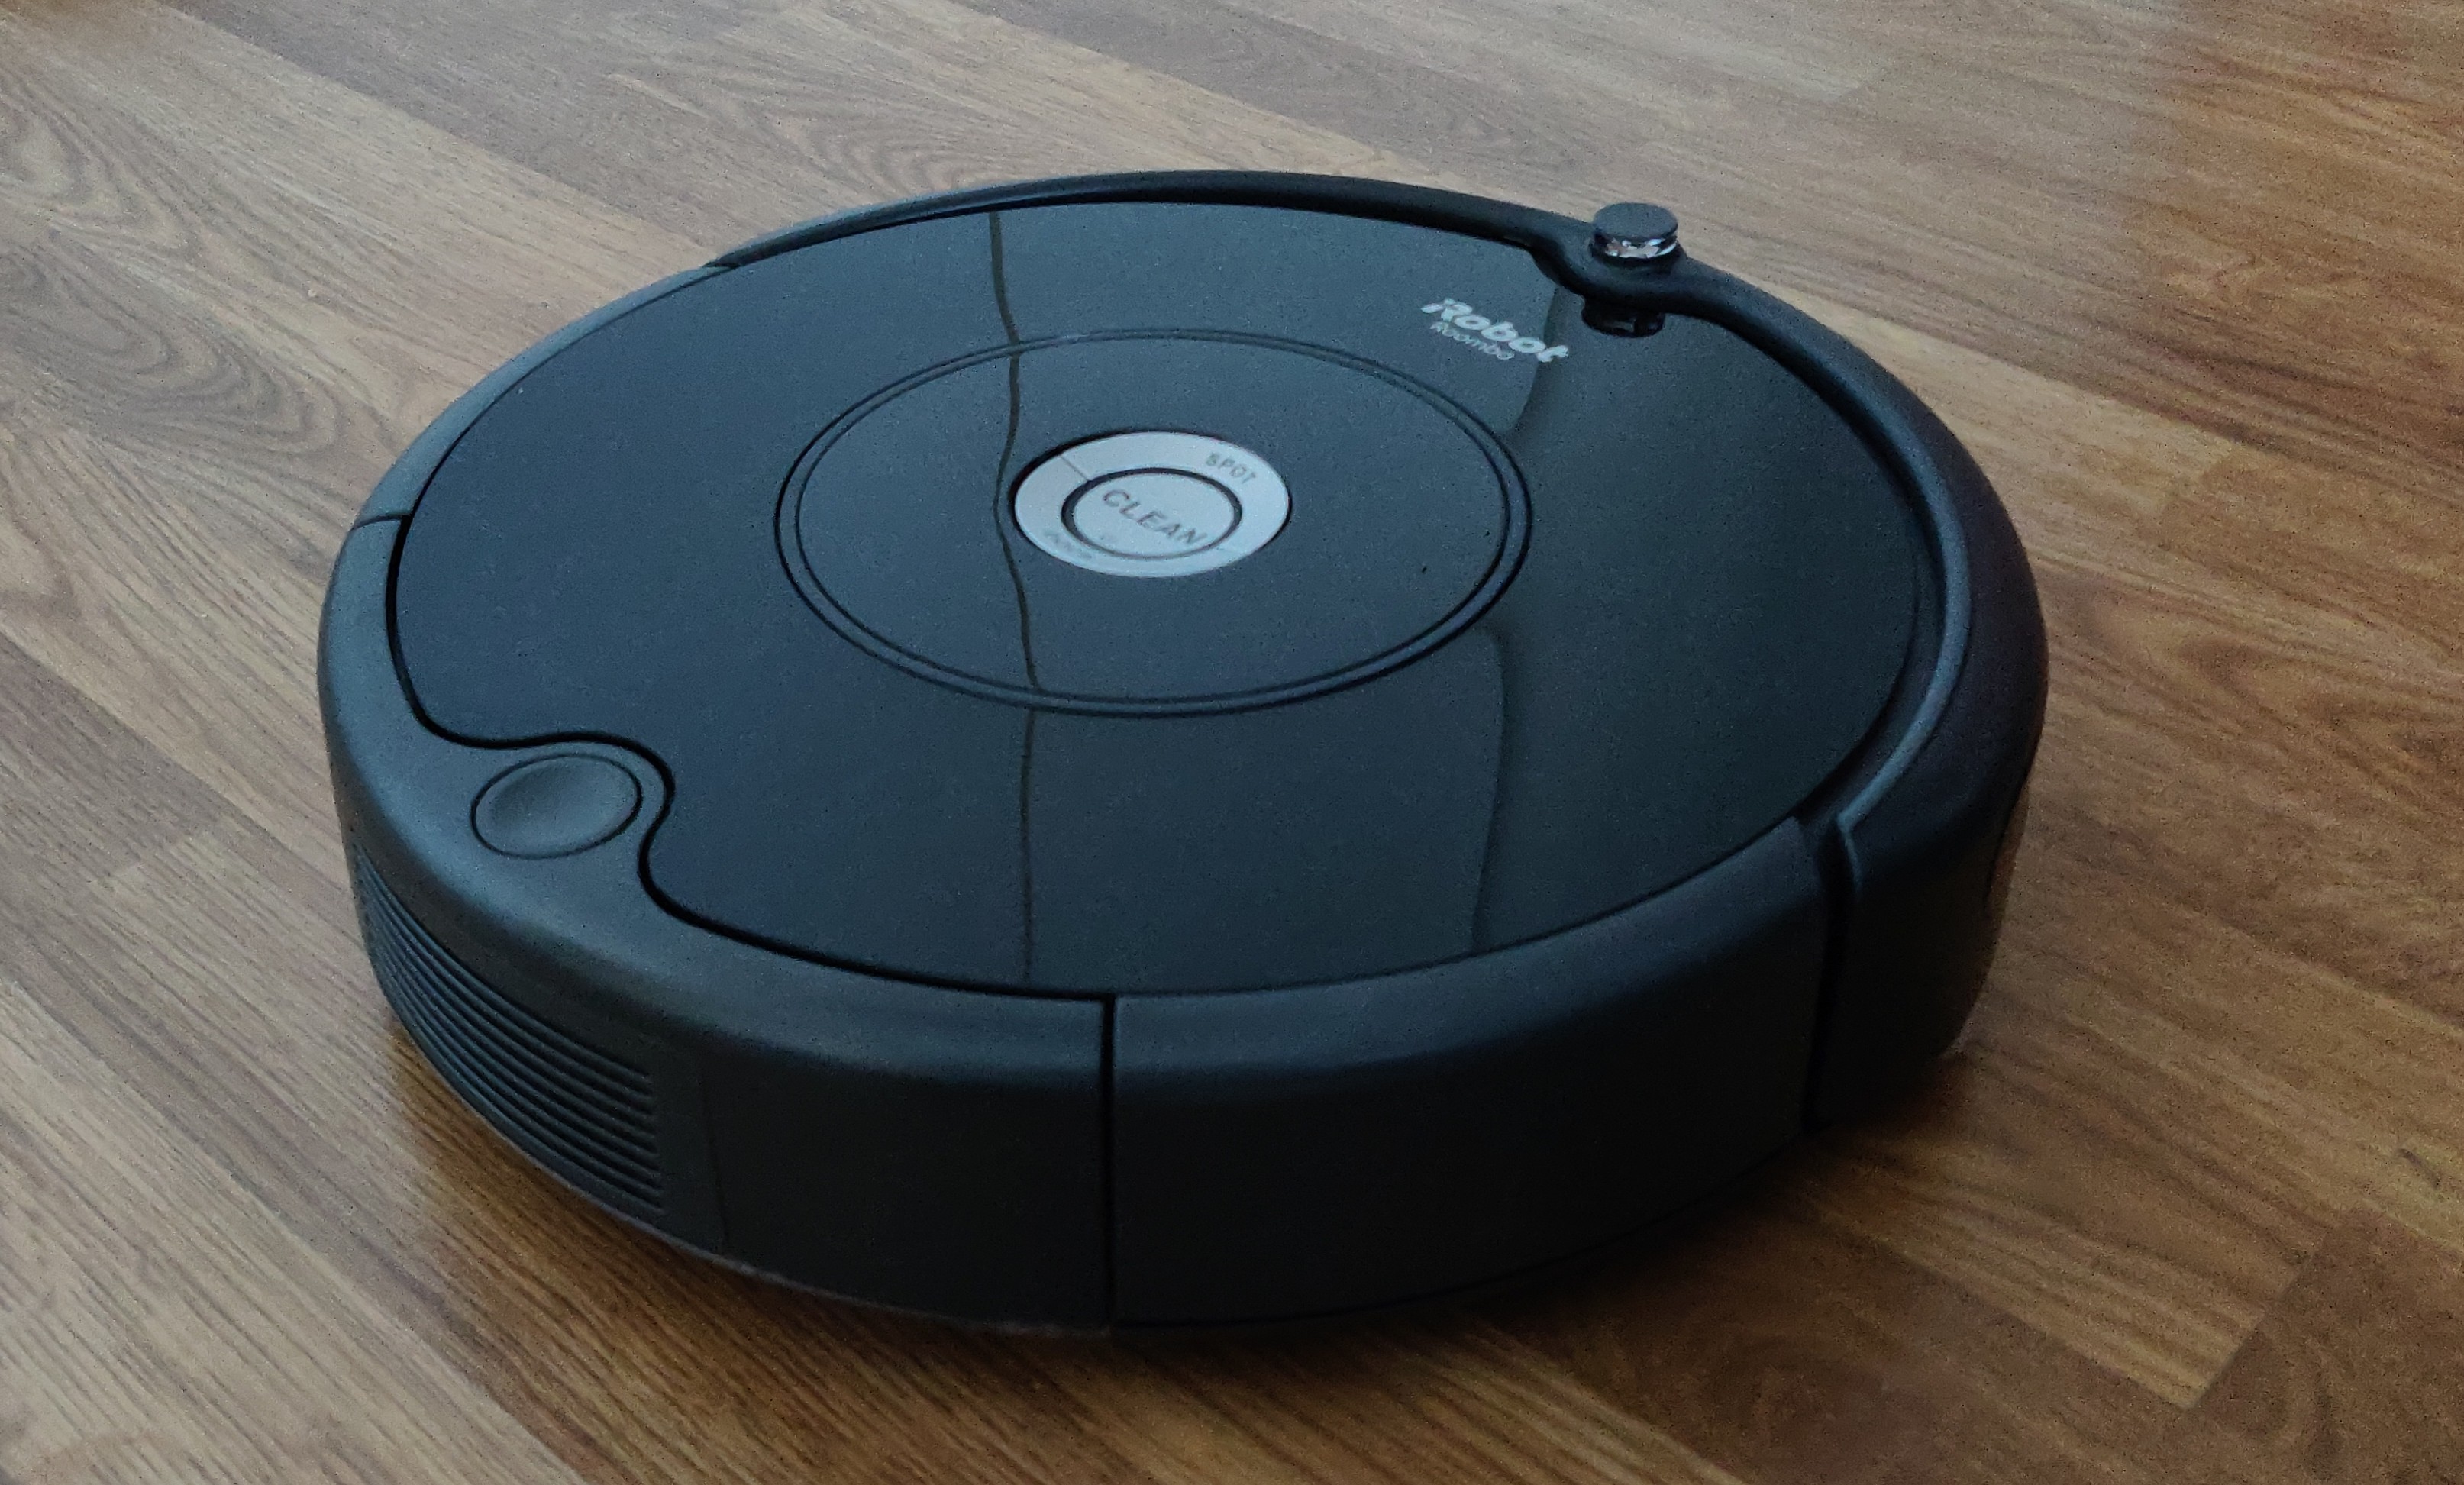 Roomba 605 review - Can a robot be good? - AfterDawn